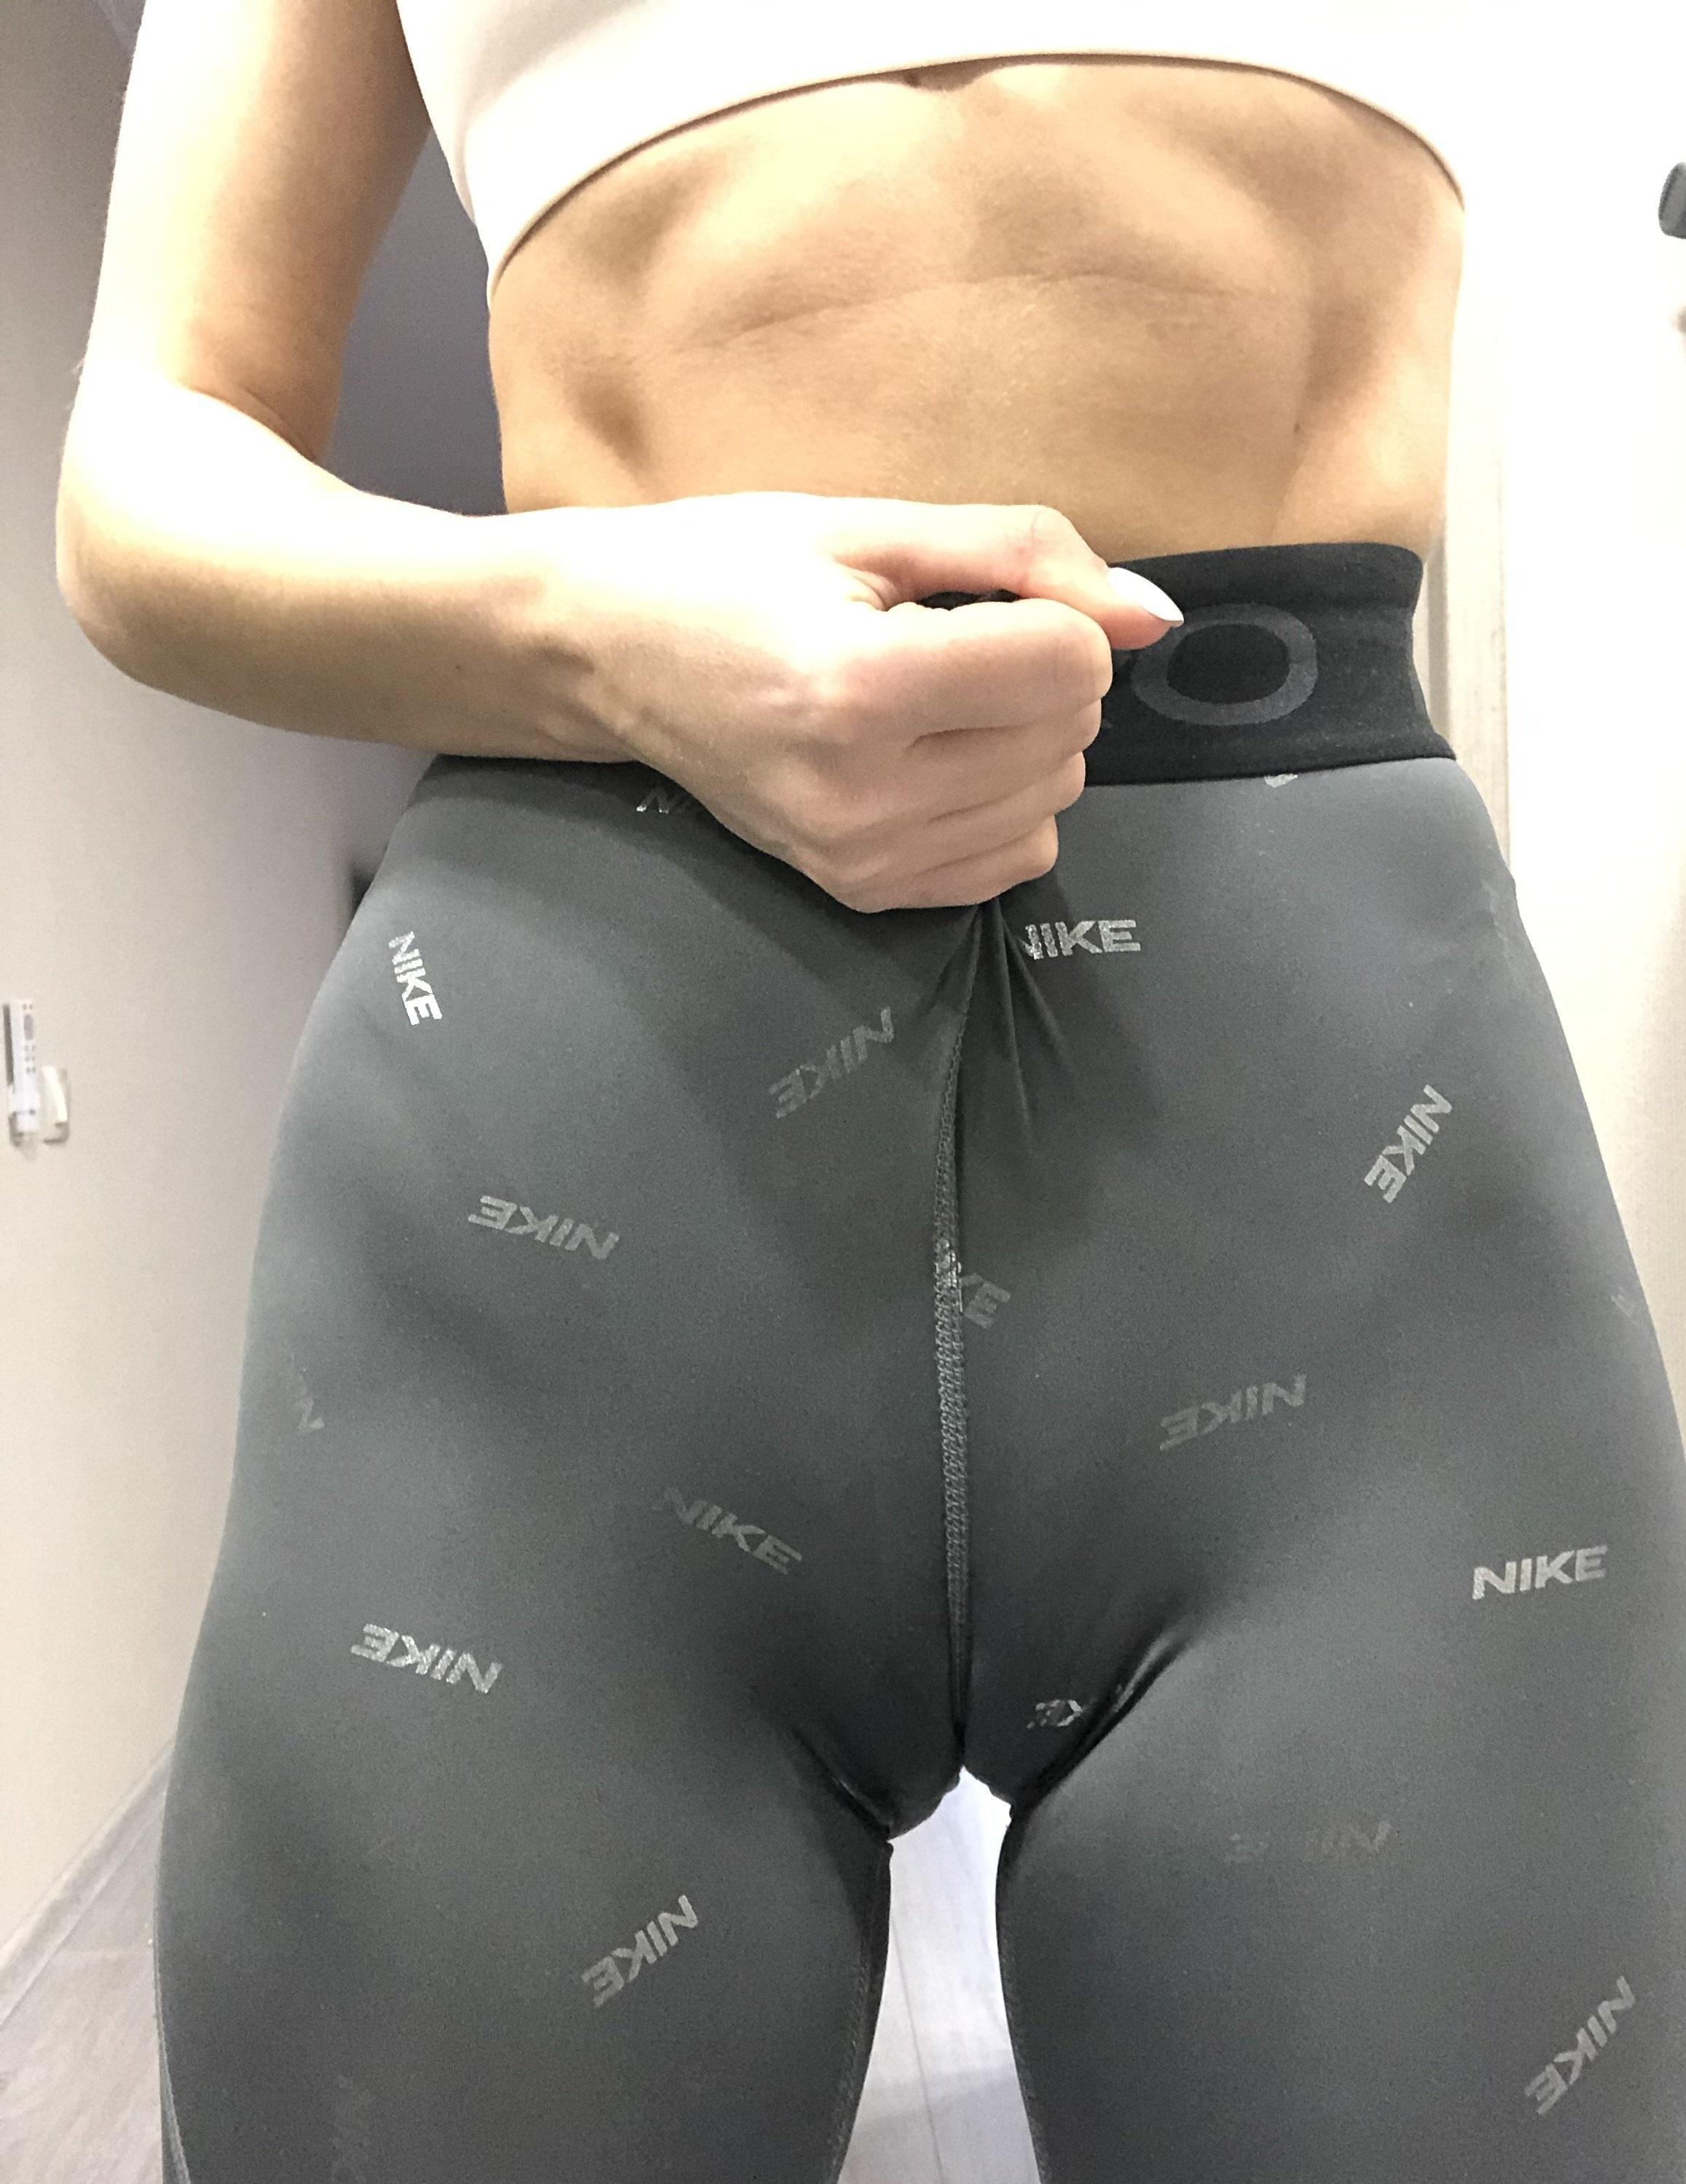 My tight leggings cameltoe 💕 Wanna see my ass in leggings too